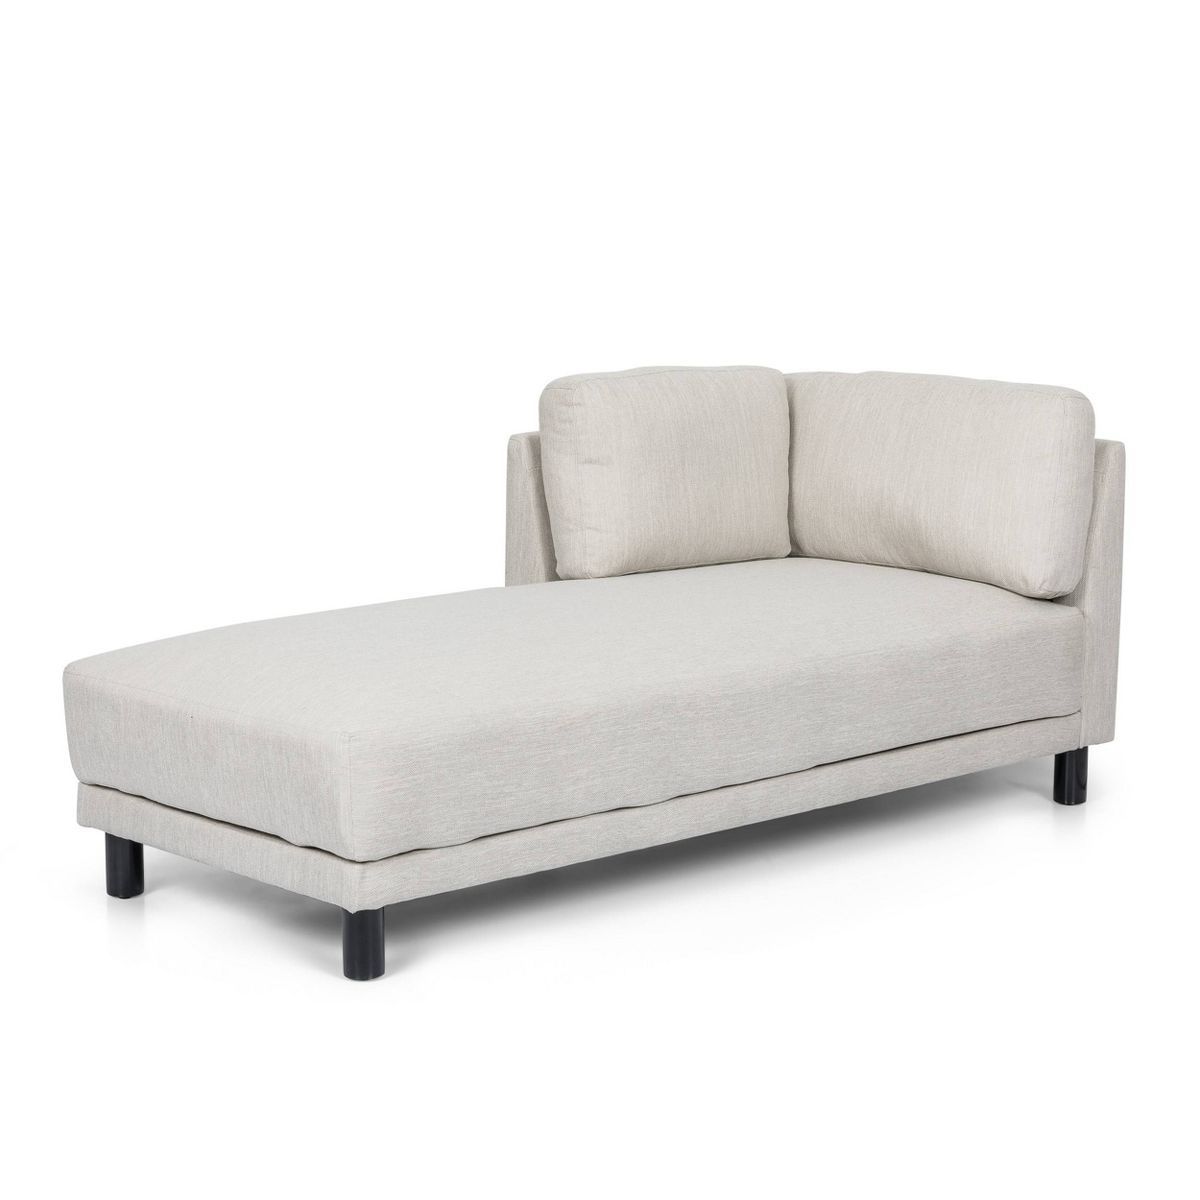 Hyland Contemporary Fabric Upholstered Chaise Lounge - Christopher Knight Home | Target